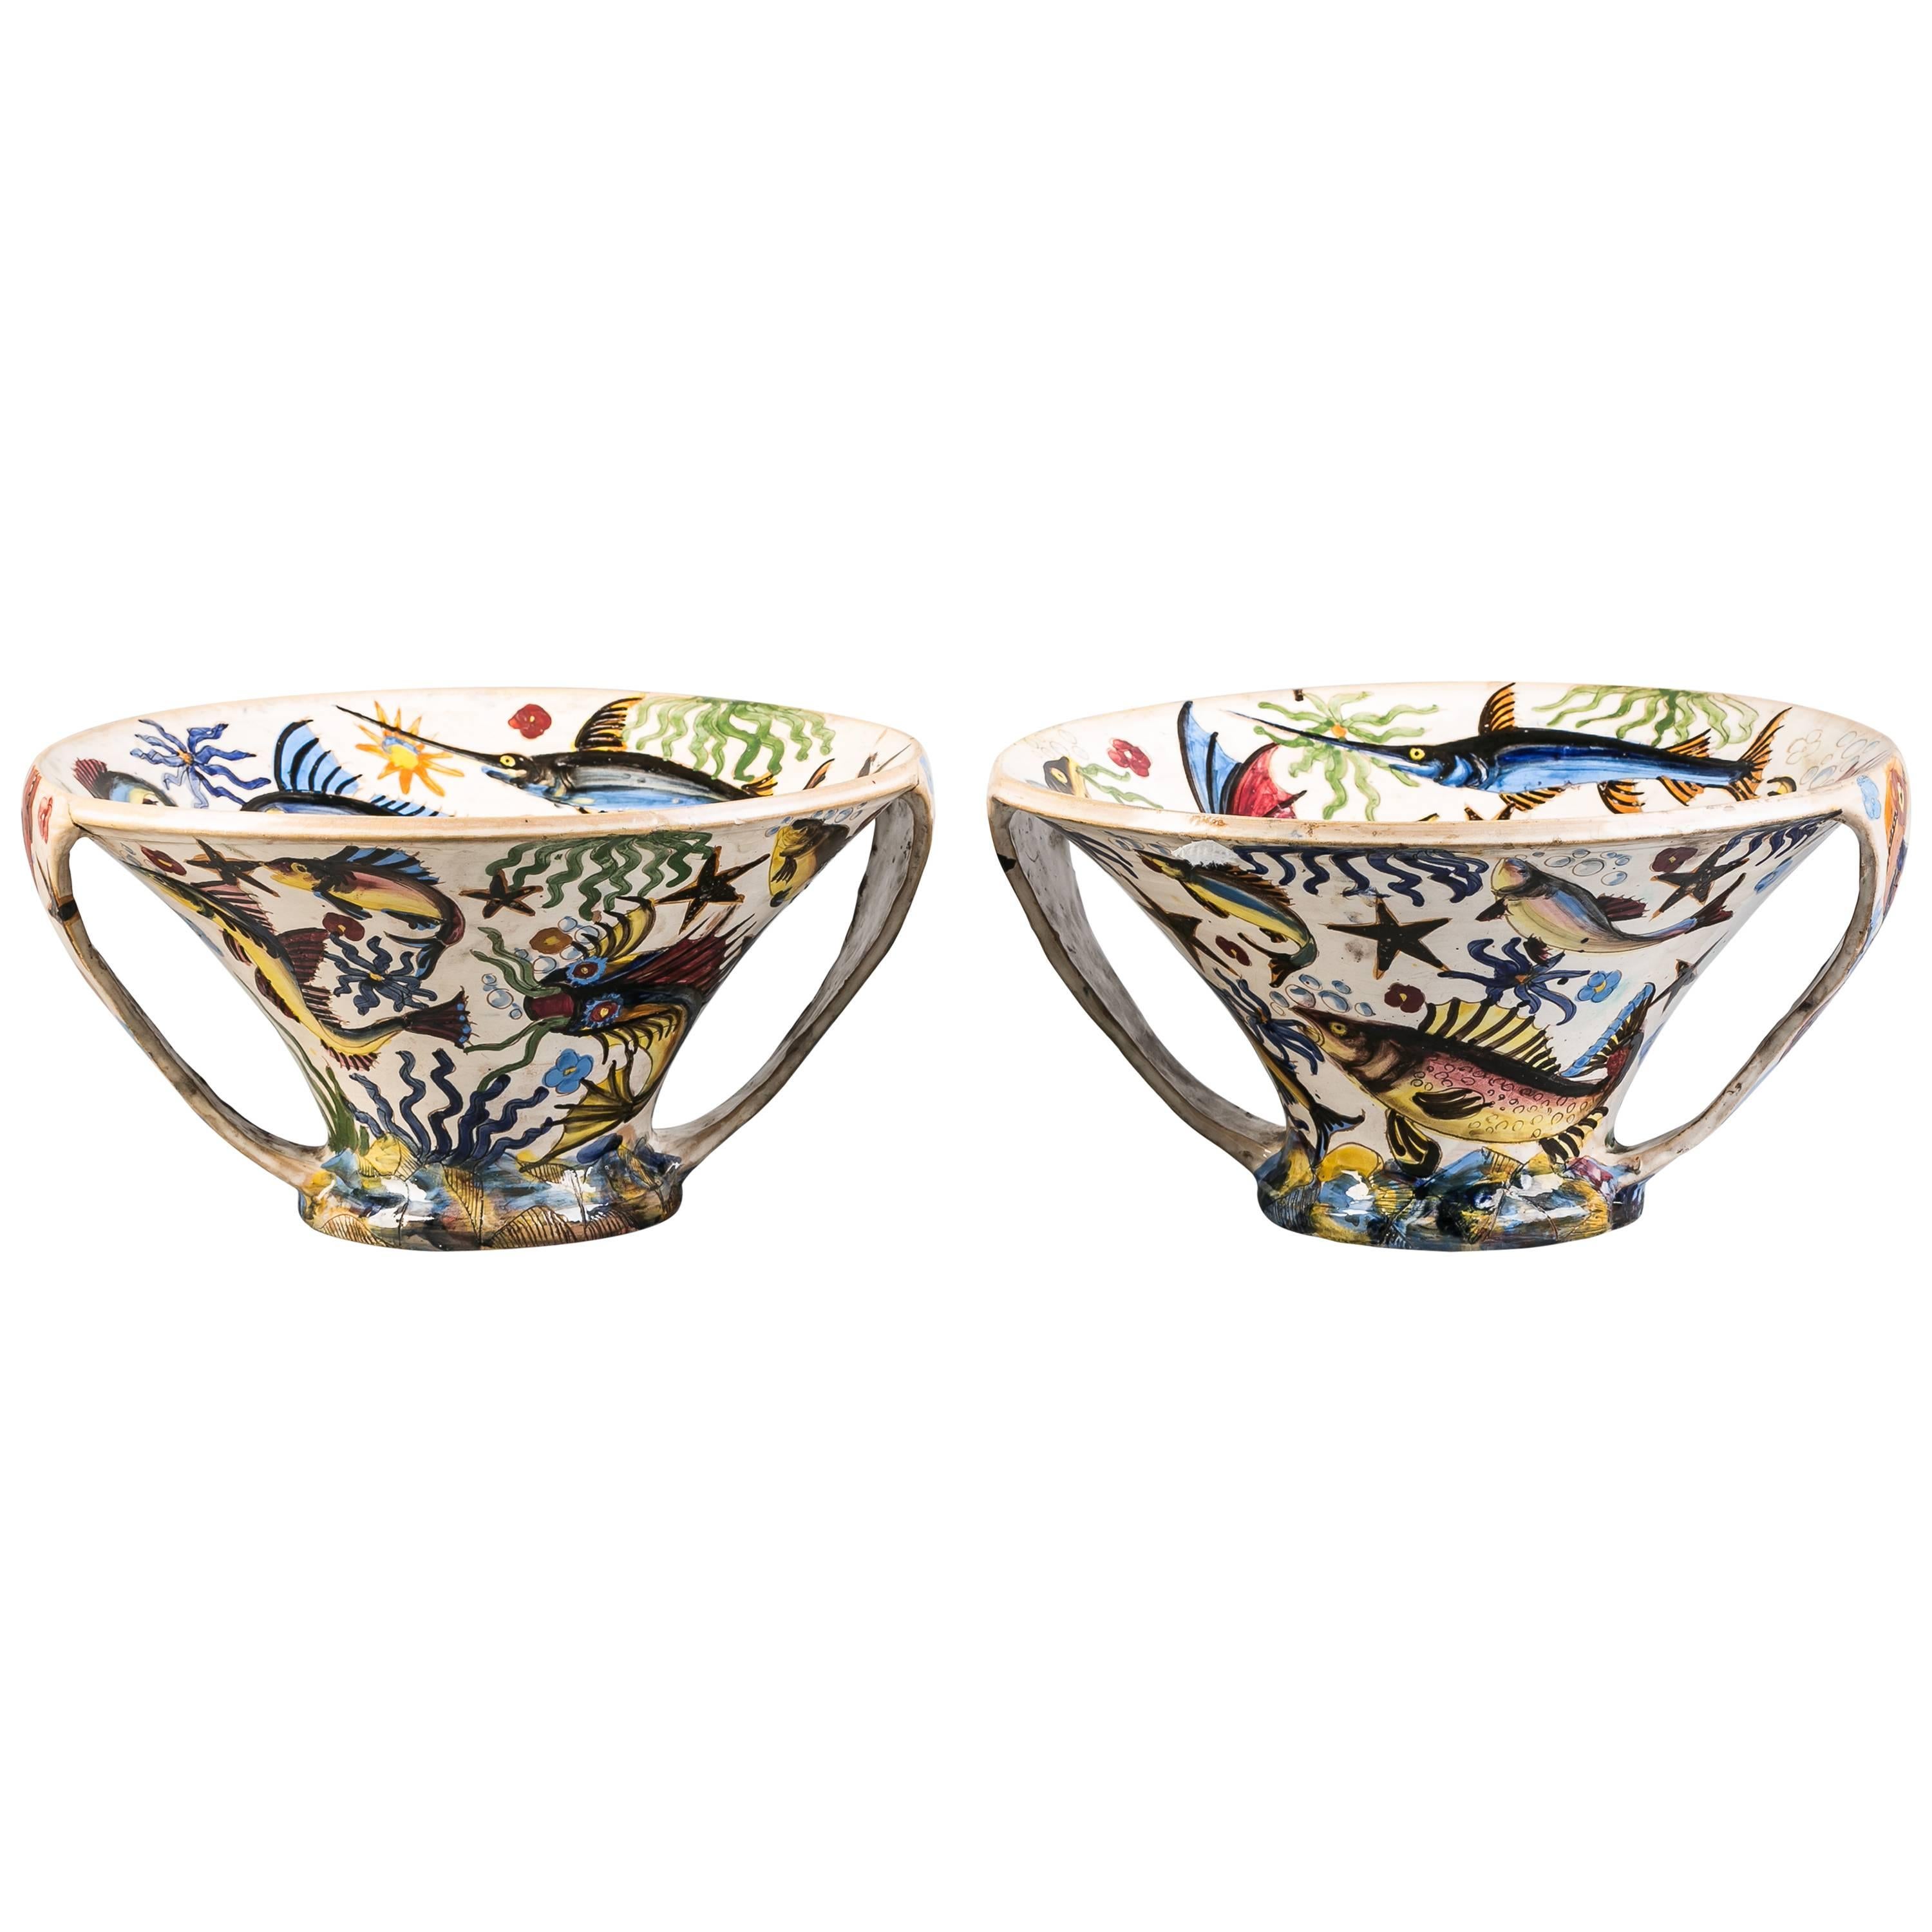 Pair of Italian Ceramic Two-Handled Conical Centrepiece Bowls, circa 1900 For Sale